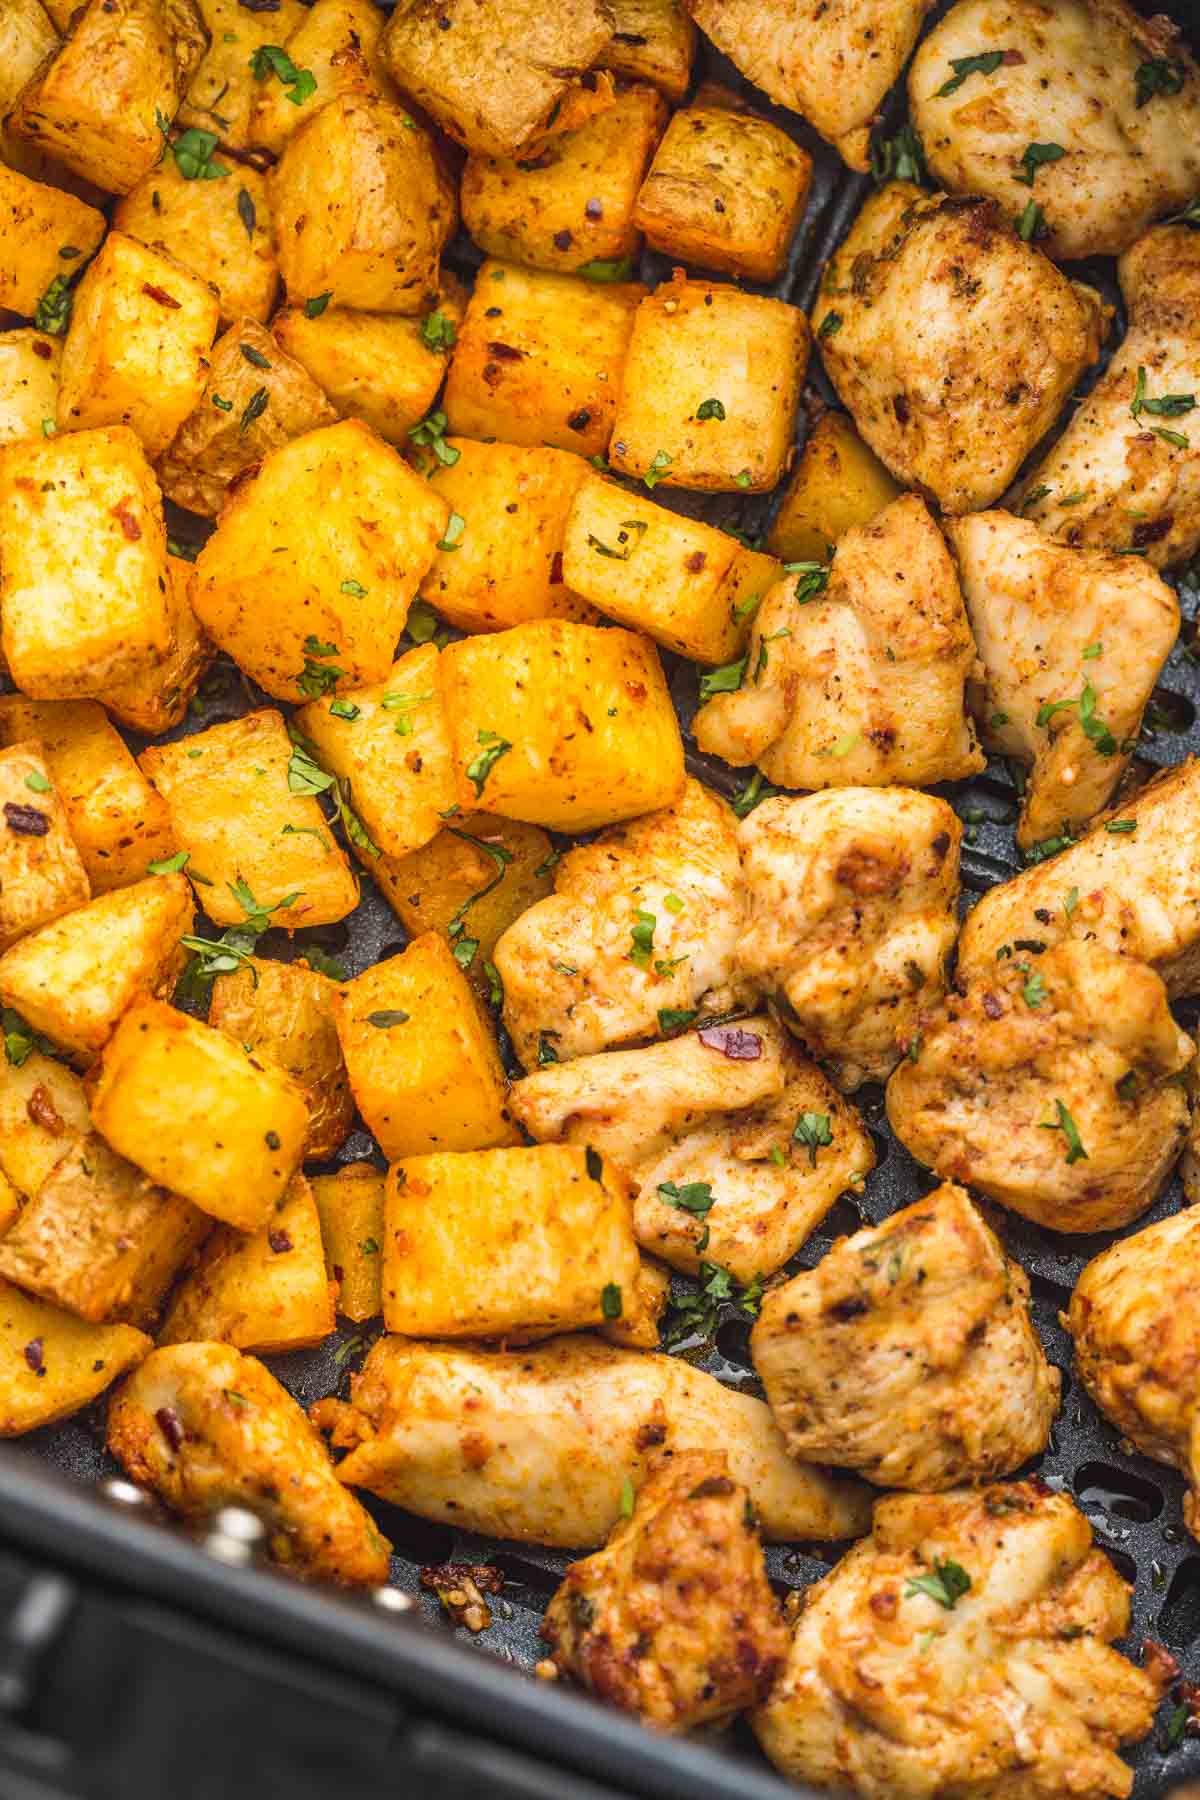 A close up of perfectly roasted potatoes, and cooked chicken pieces in an air fryer basket